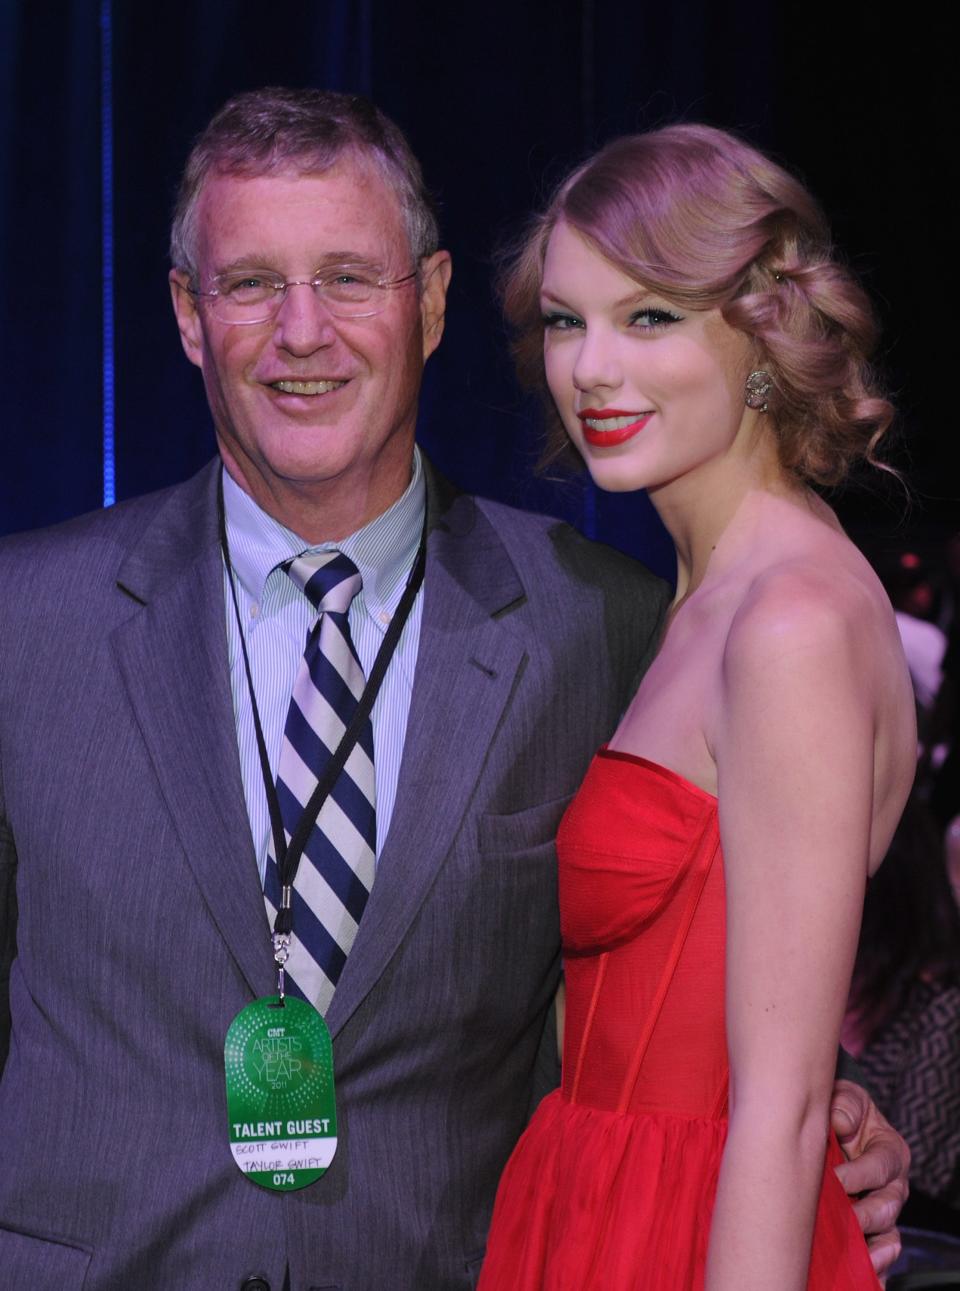 Scott K. Swift and  daughter Taylor Swift at the 2011 CMT Artists of the Year celebration at the Bridgestone Arena on November 29, 2011 in Nashville, Tennessee.